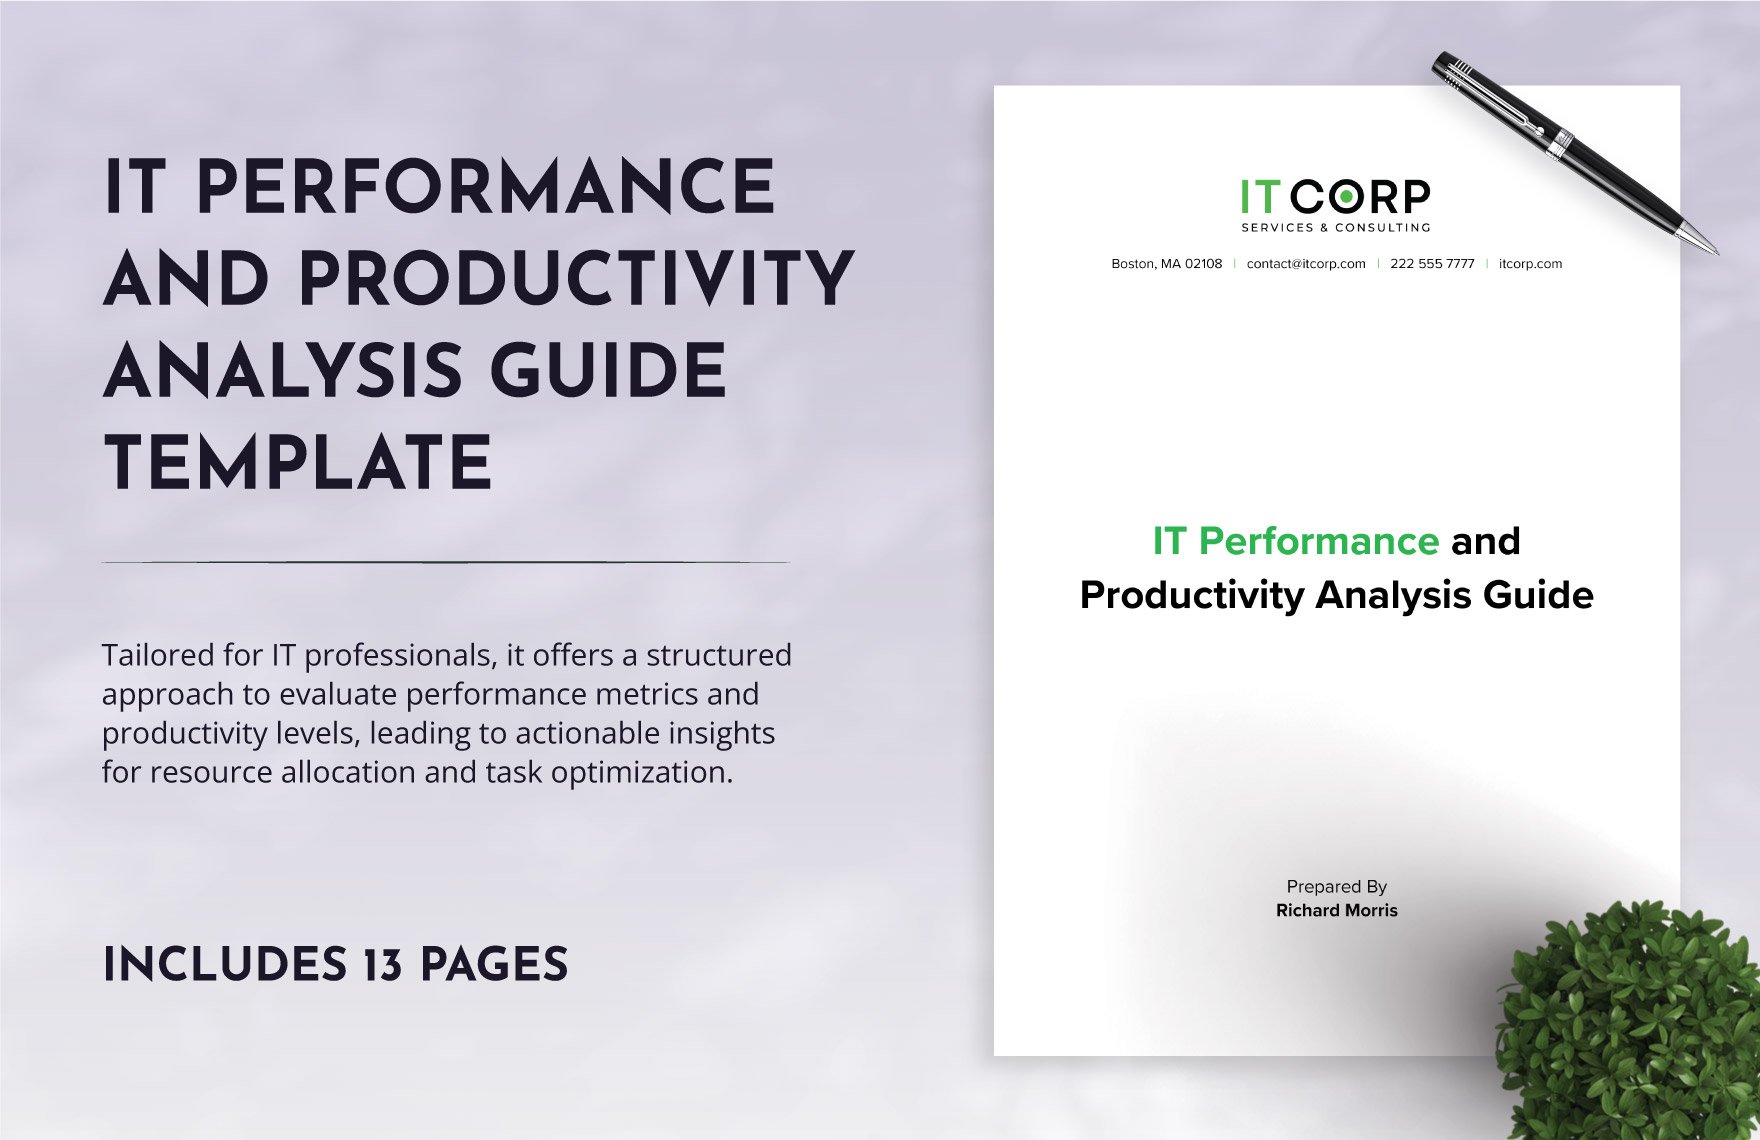 IT Performance and Productivity Analysis Guide Template